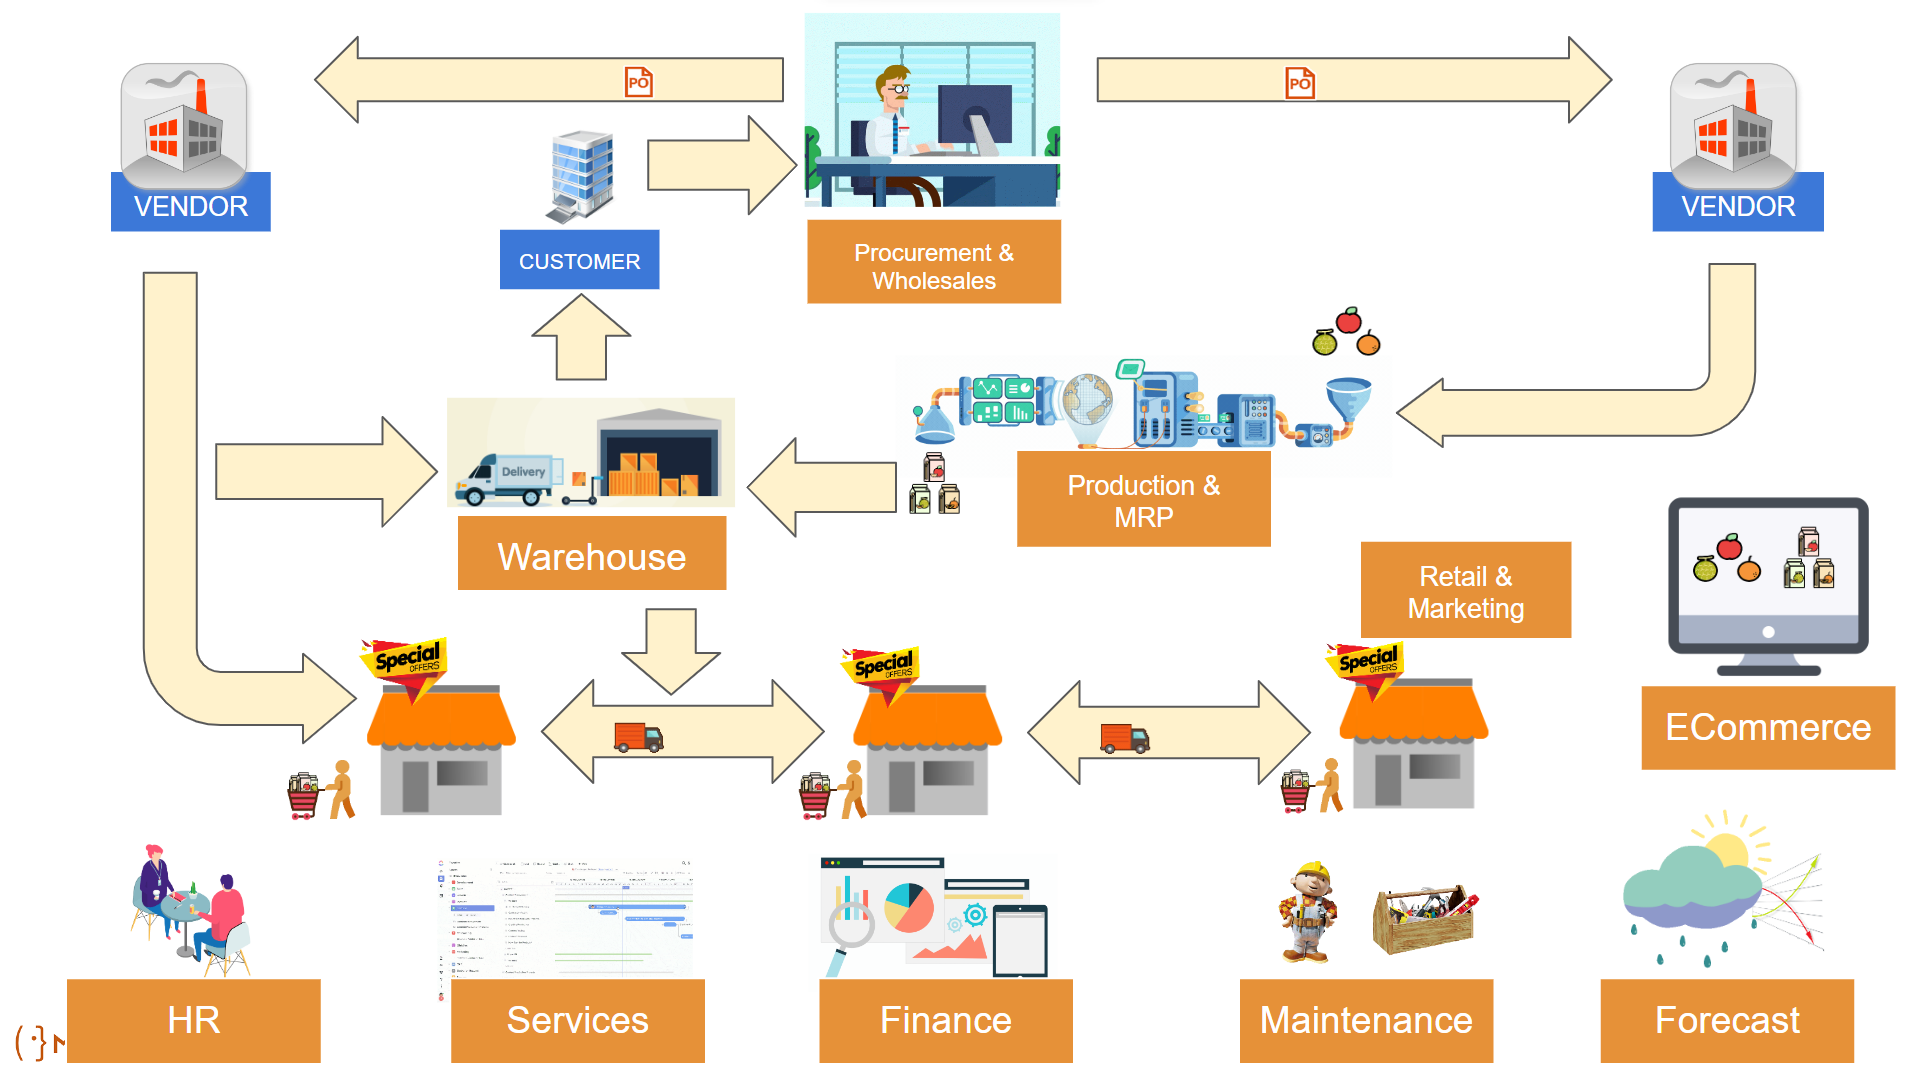 MonsoonSIM infographic illustrating the business process flow from vendors to customers, encompassing areas like Procurement, Wholesales, Warehouse management, Production, Retail, E-commerce, HR, Services, Finance, Maintenance, and Forecasting, 